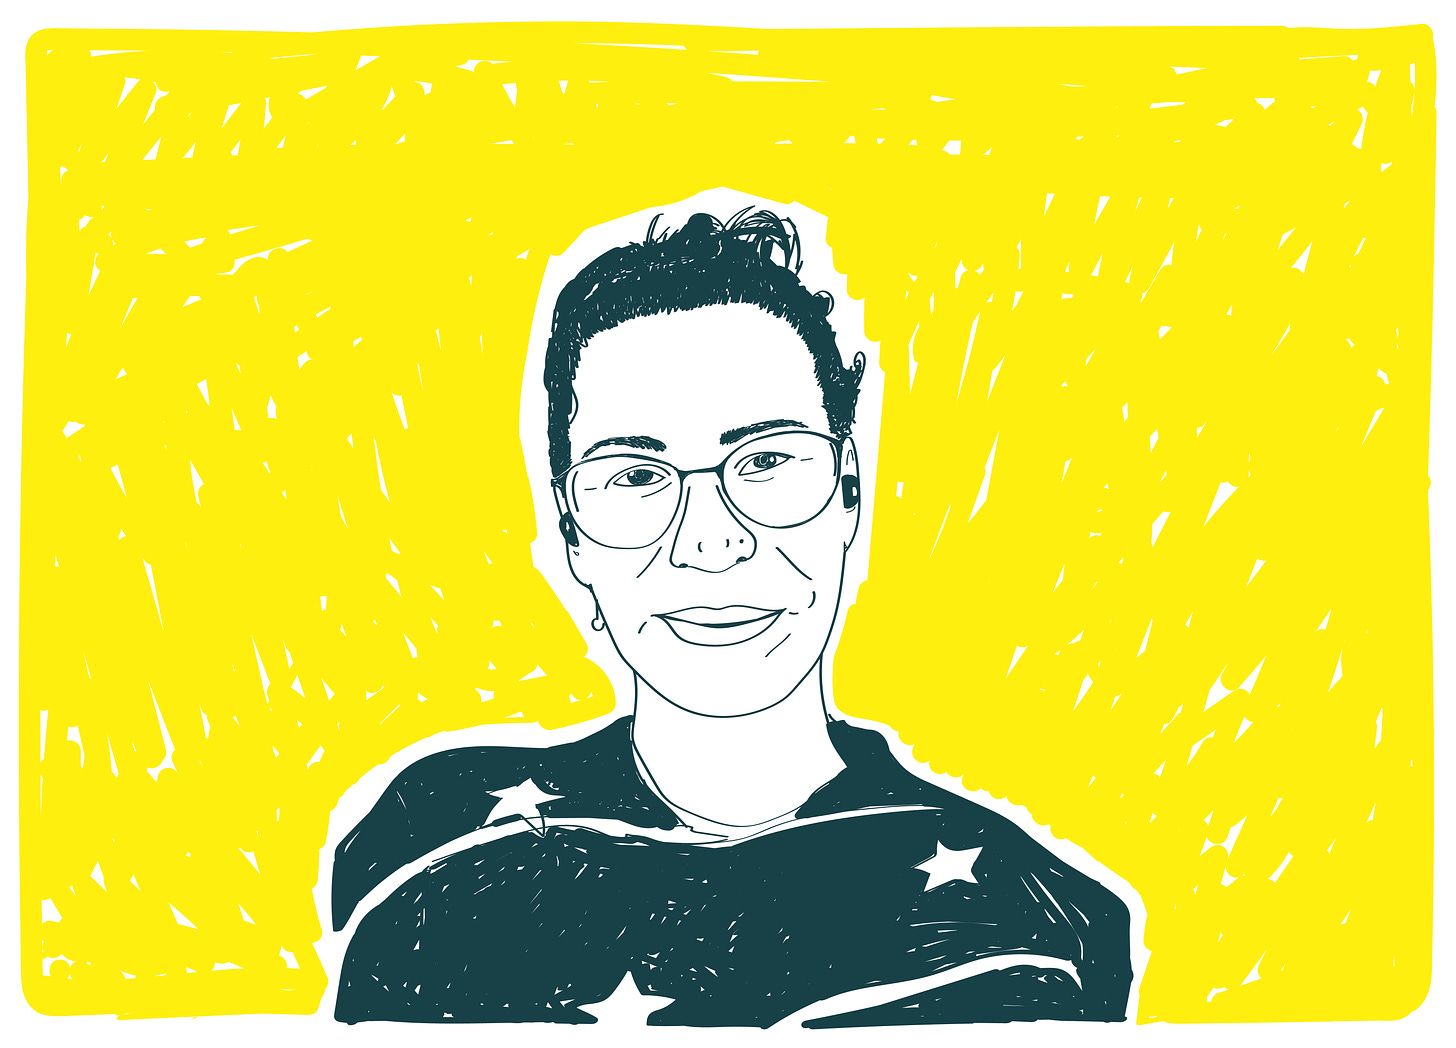 Black and white line sketch, on yellow background, of Madelleine, a white woman with dark hair in a ponytail, wearing glasses and a dark top with white stars on it